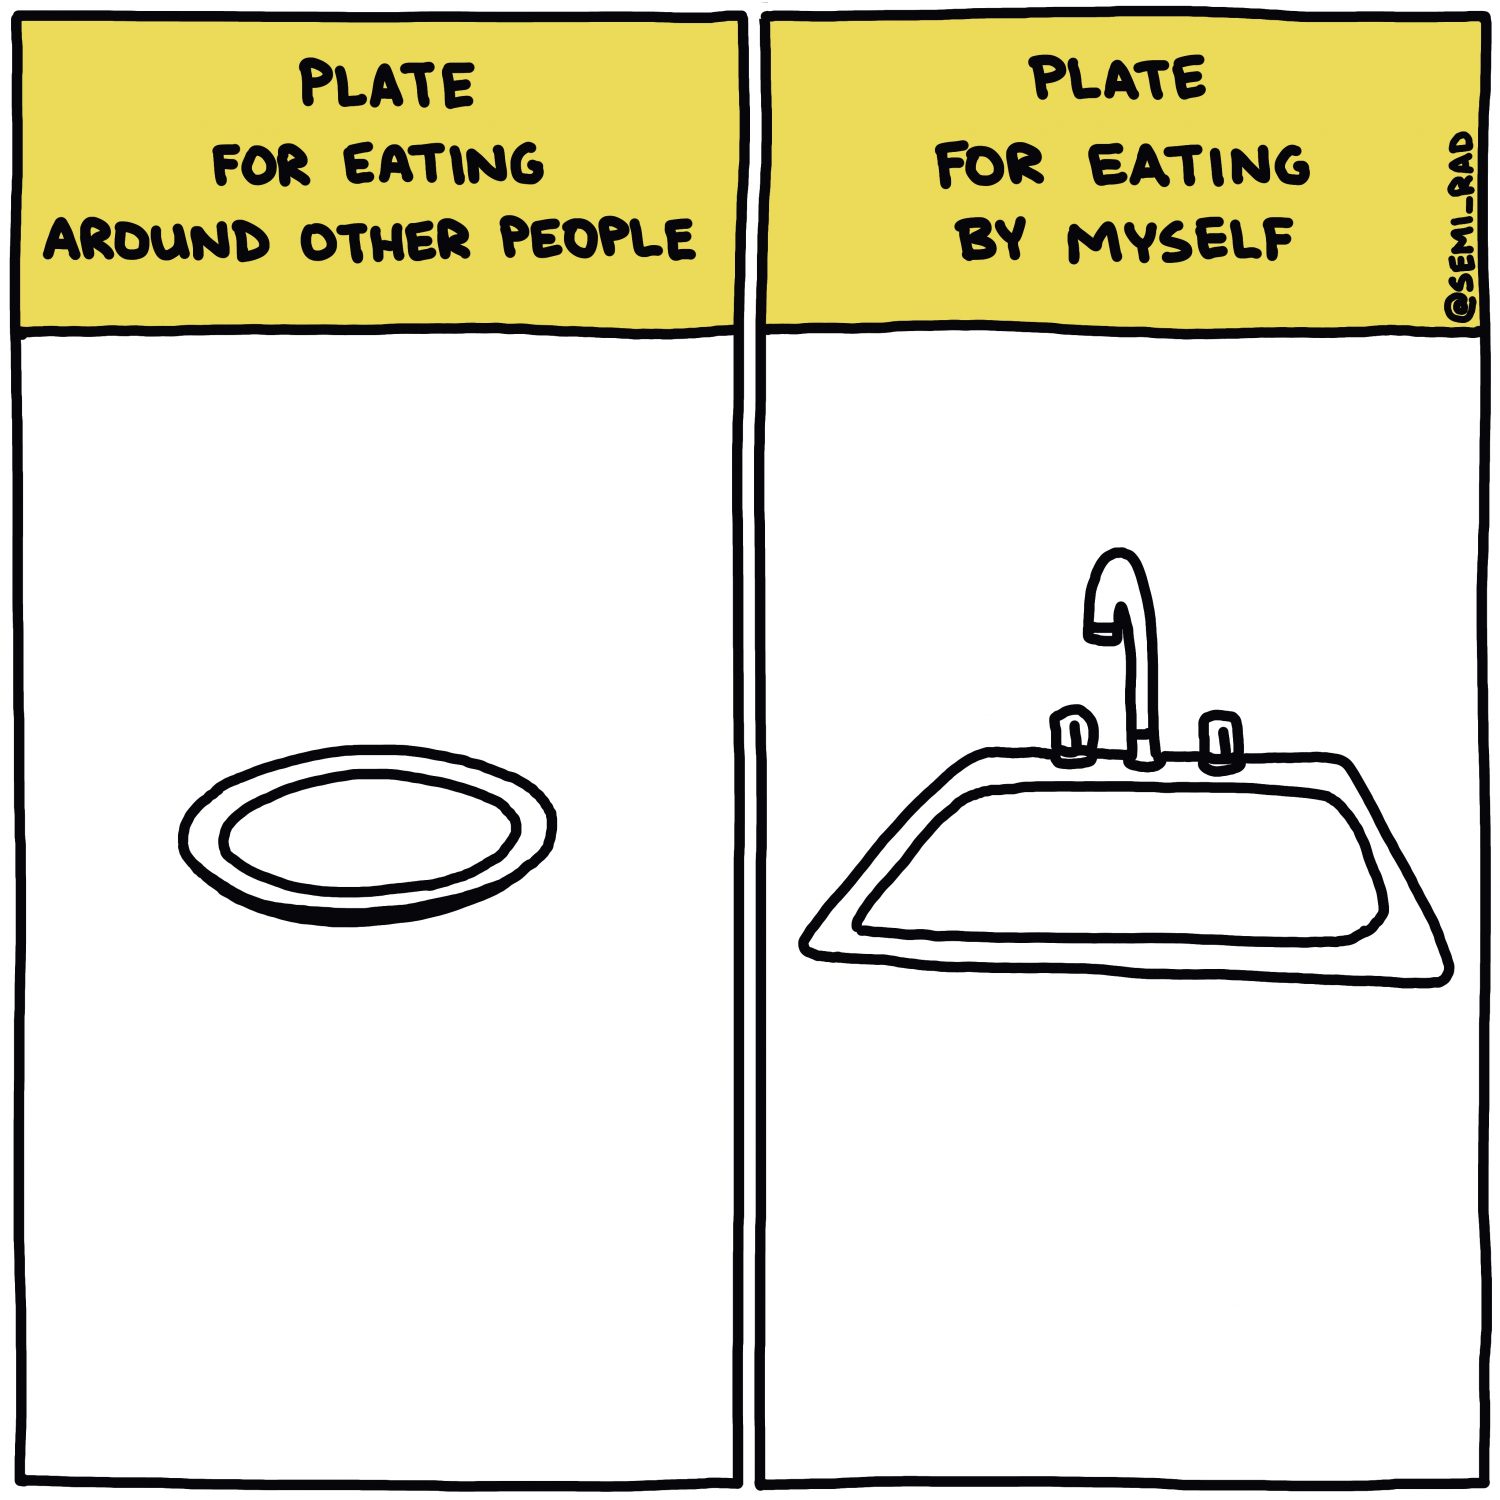 Plate For Eating Around Other People Vs. Plate For Eating By Myself